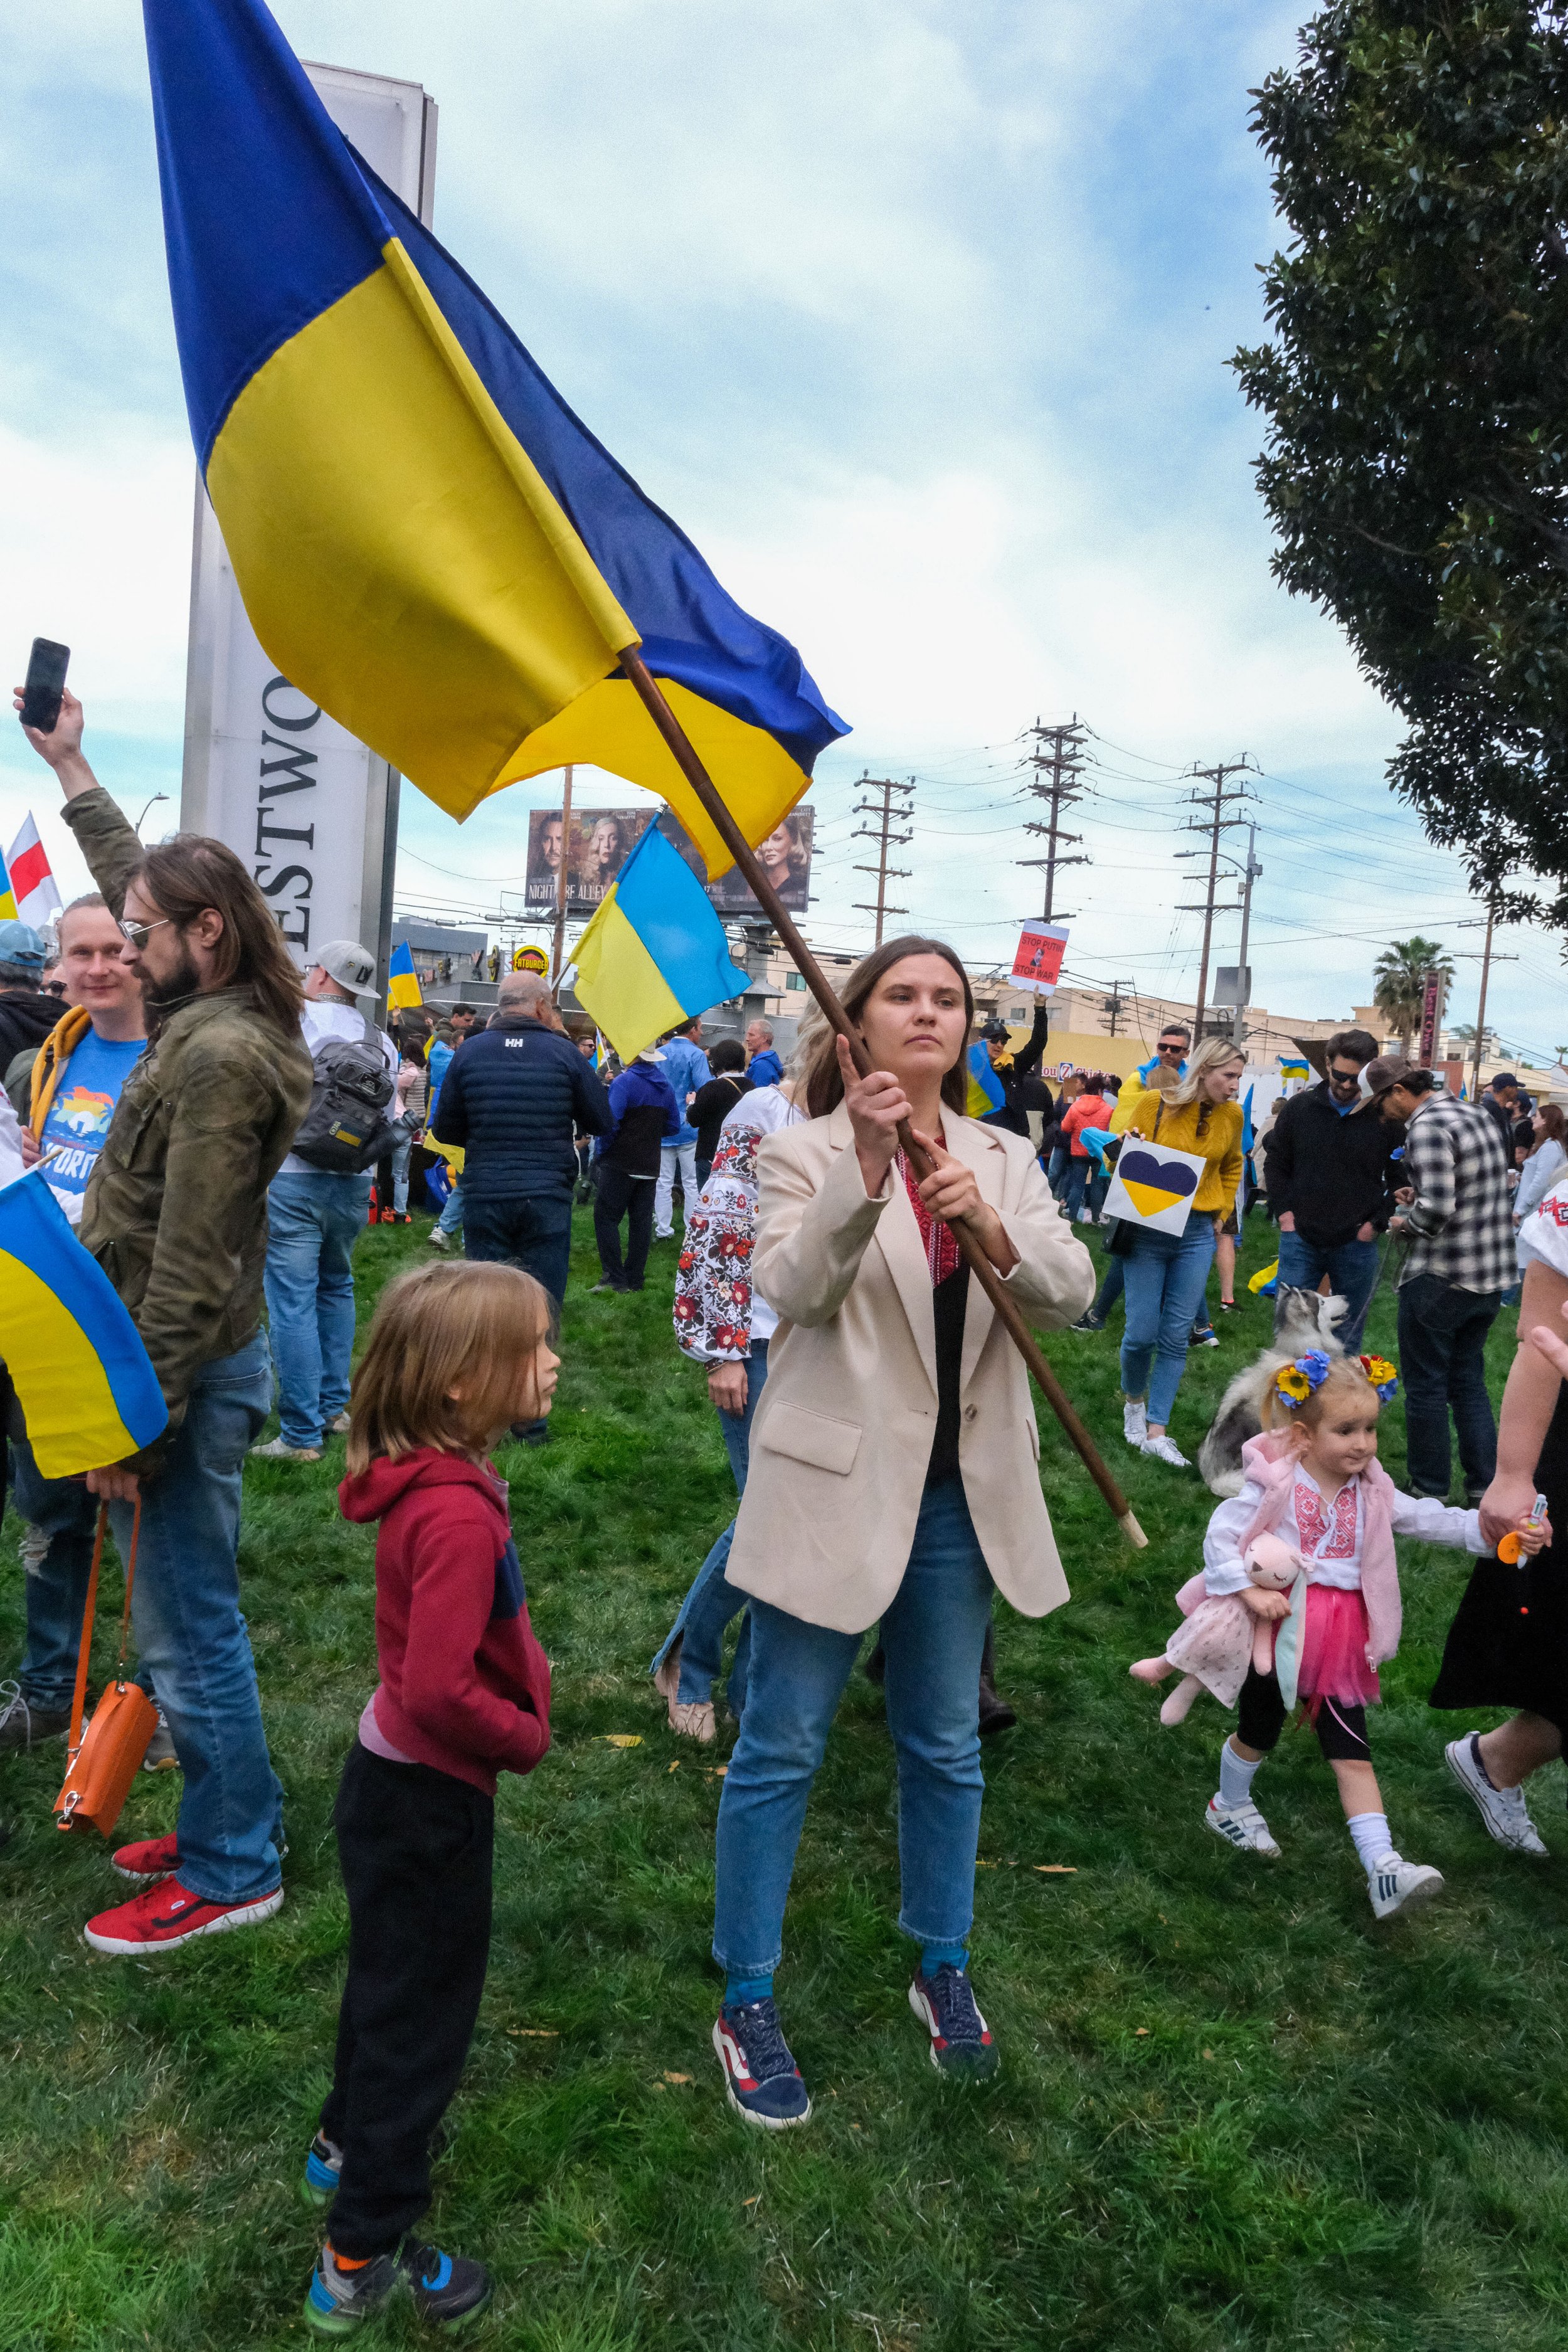  Hanna Husakova waves a Ukrainian flag next to her son, Sascha. Husakova was born in Donetsk, Ukraine, and still has family and friends in Ukraine. She states that “We cannot be silent here in the world. “  Some moms from her son’s school were “suppo